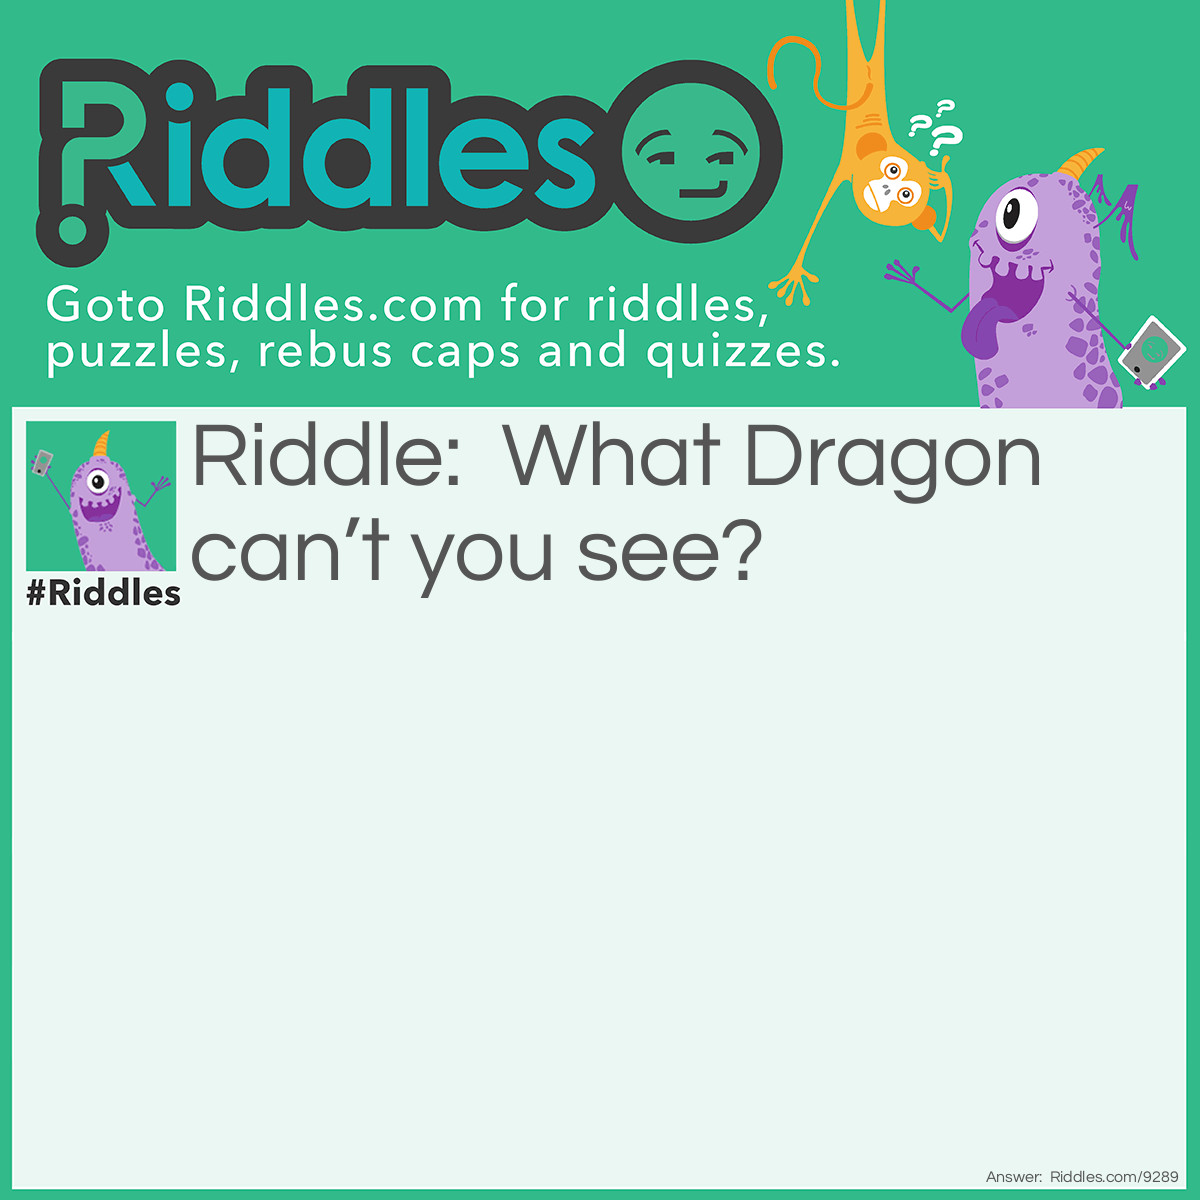 Riddle: What Dragon can't you see? Answer: The shadow dragon